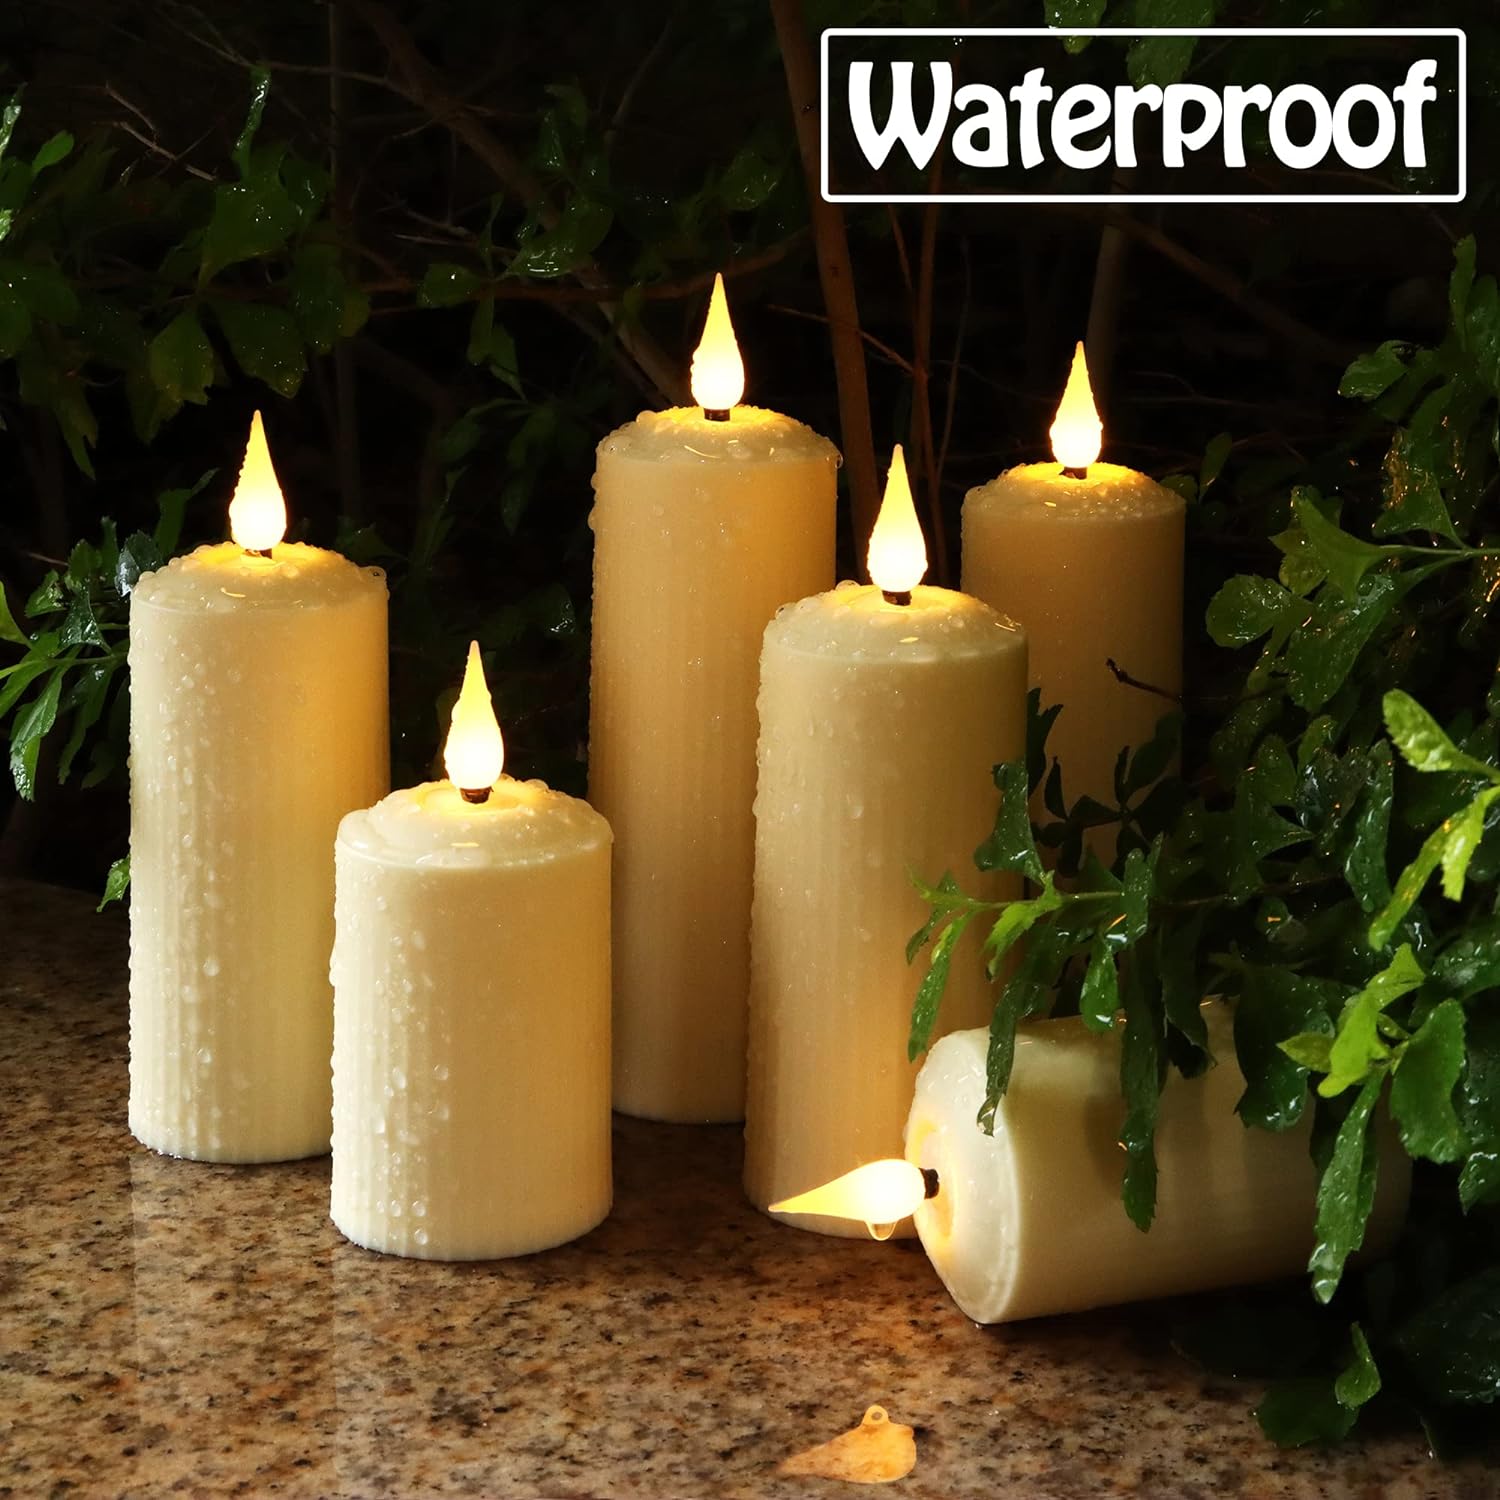 yunsheng Rechargeable LED Candles with 10 Button Remote Control, Outdoor Waterproof Flameless Candles with 6/8 Hour Timer, Roman Pillar Candle in Set of 6 (5 x 10.5/14/16.5 cm), Ivory, Type-C